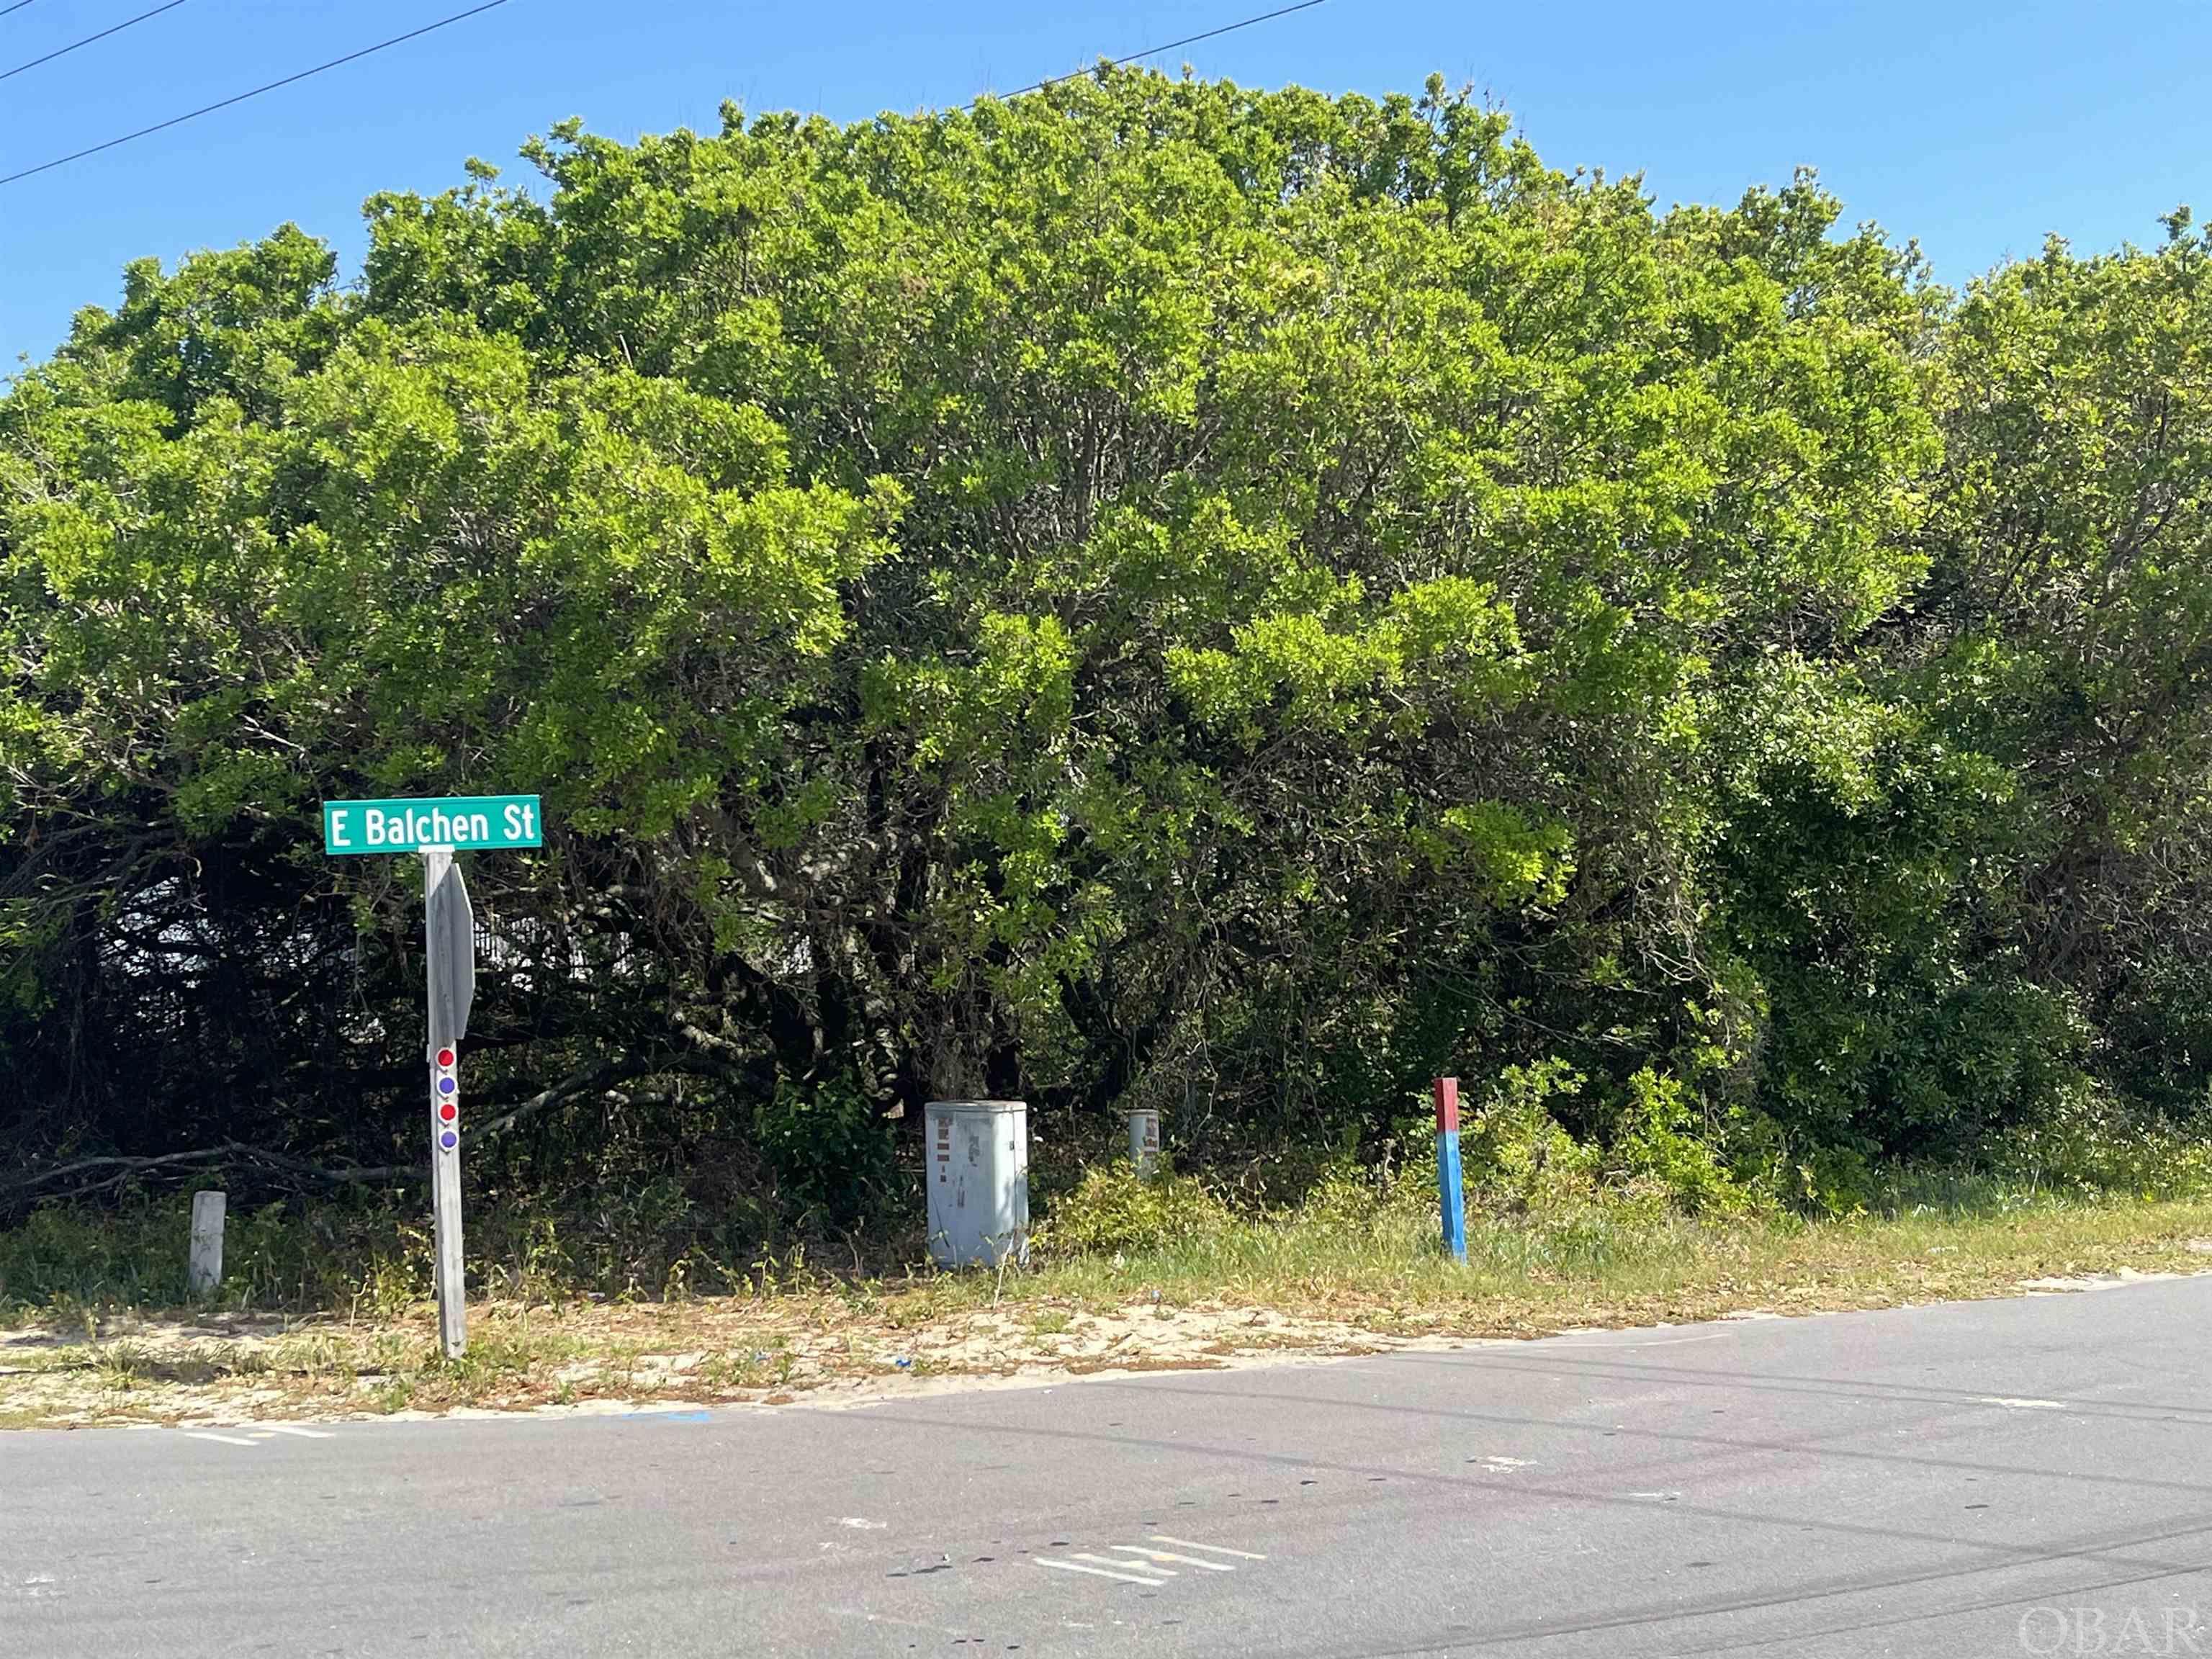 SELLER CALLING FOR HIGHEST AND BEST BY 5 PM, 5/6. Gorgeous lot and great location to build your home at the beach or investment property! Just a short walk east on Balchen and you are at the beach!